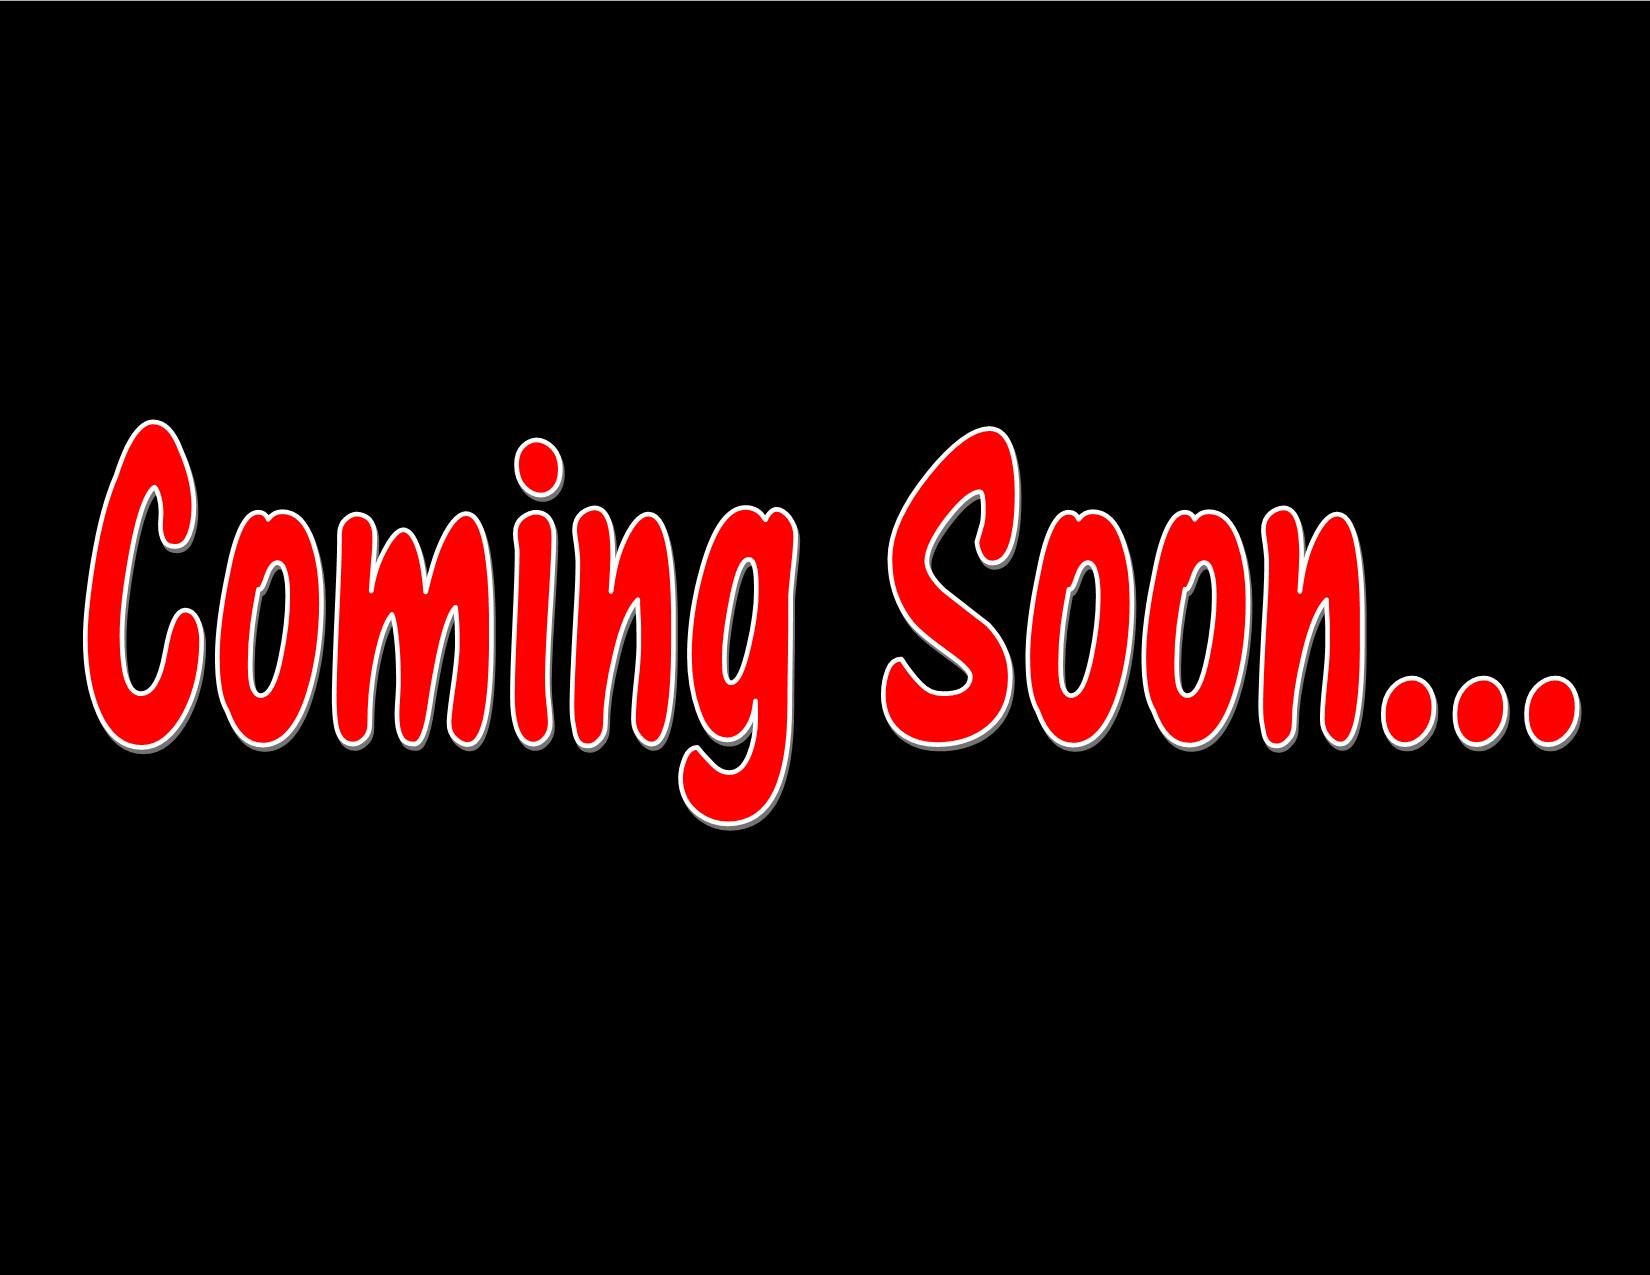 coming soon sign